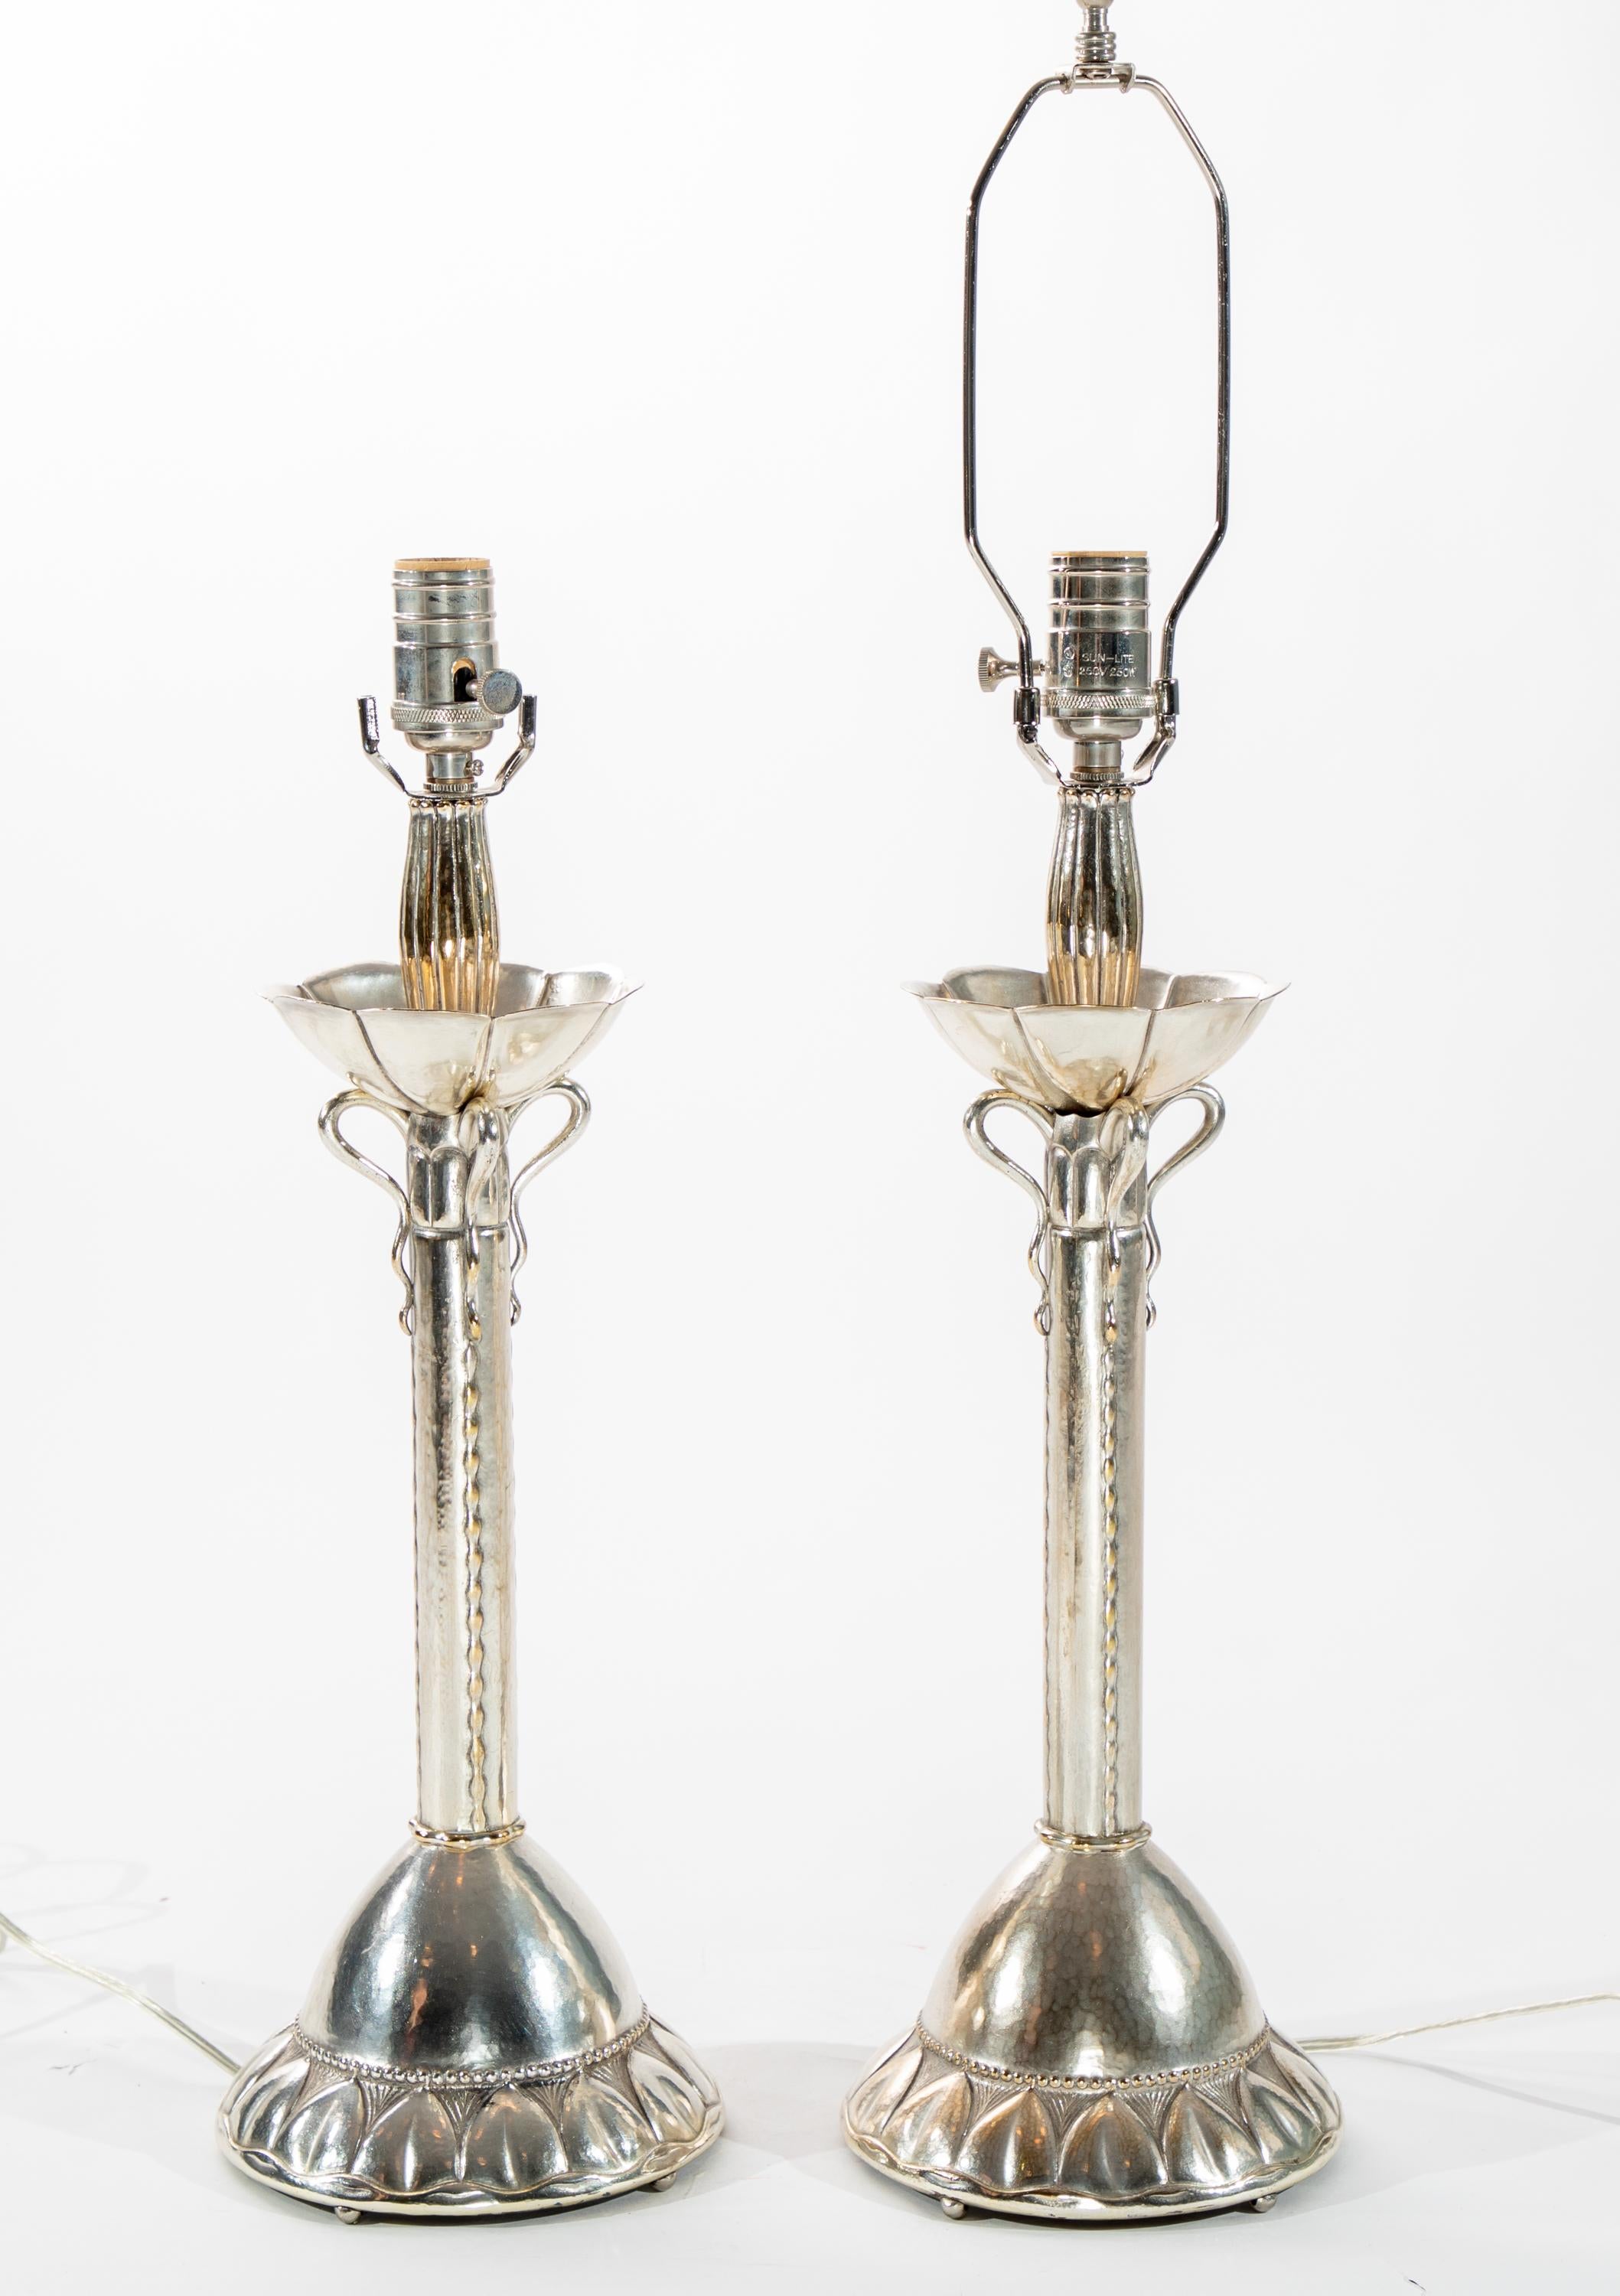 Made from silver-plated, hammered metal candlesticks, pair of early 20th century table lamps.  German origin

Recent re-wiring.
